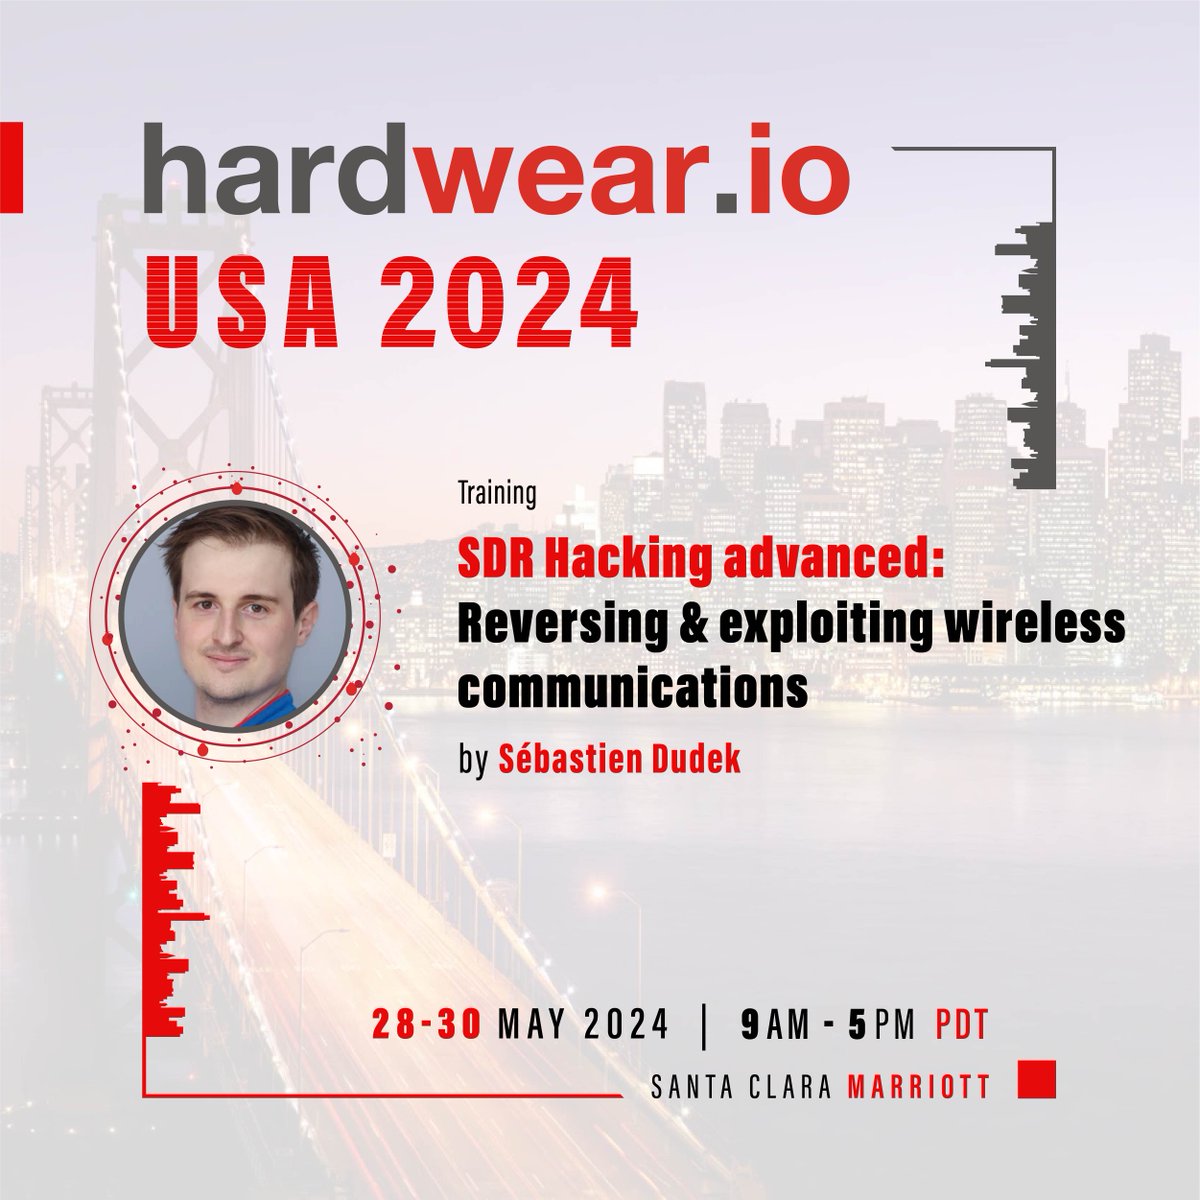 '🔻 This advanced training course by @PentHertz will focus on the application of SIGINT techniques and attacking real-world targets Test radio devices & break into most RF communications 📡 Learn More: hardwear.io/usa-2024/train… #hw_ioUSA2024 #hardwarehacking #SIGINT